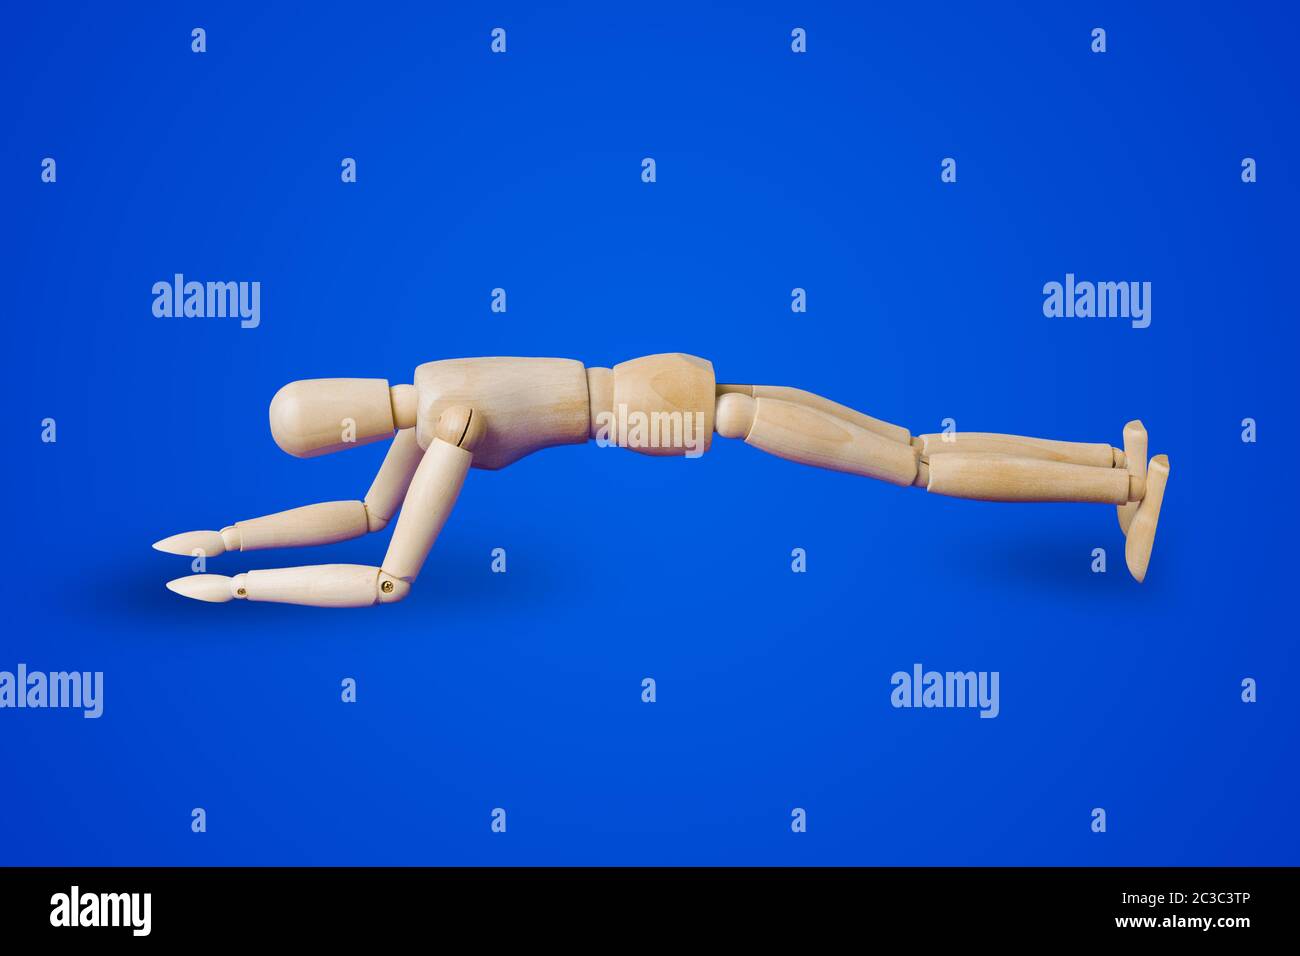 Sports wooden toy figure on blue Stock Photo